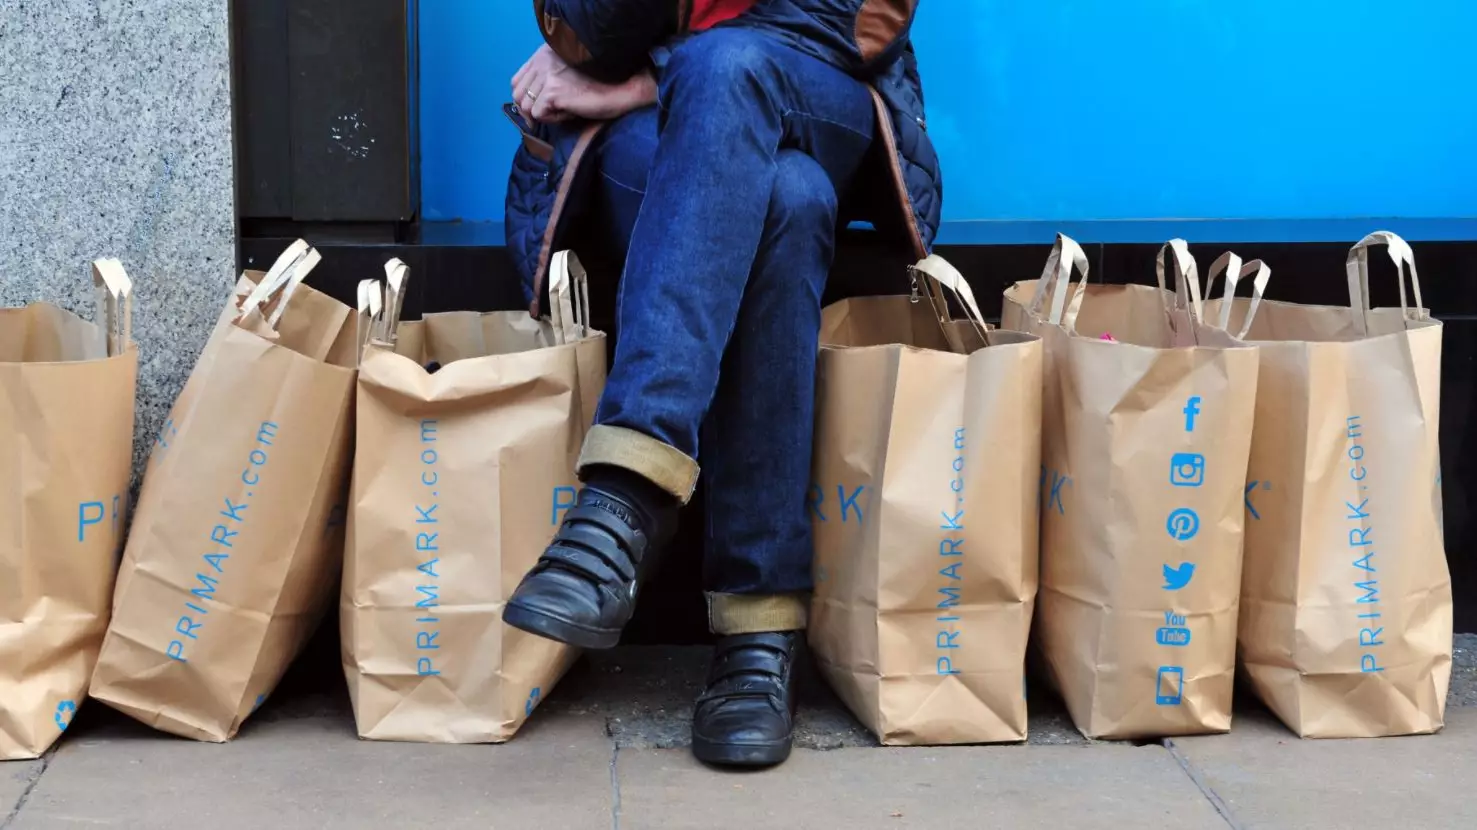 Primark To Keep Some Stores Open For 24 Hours After Lockdown